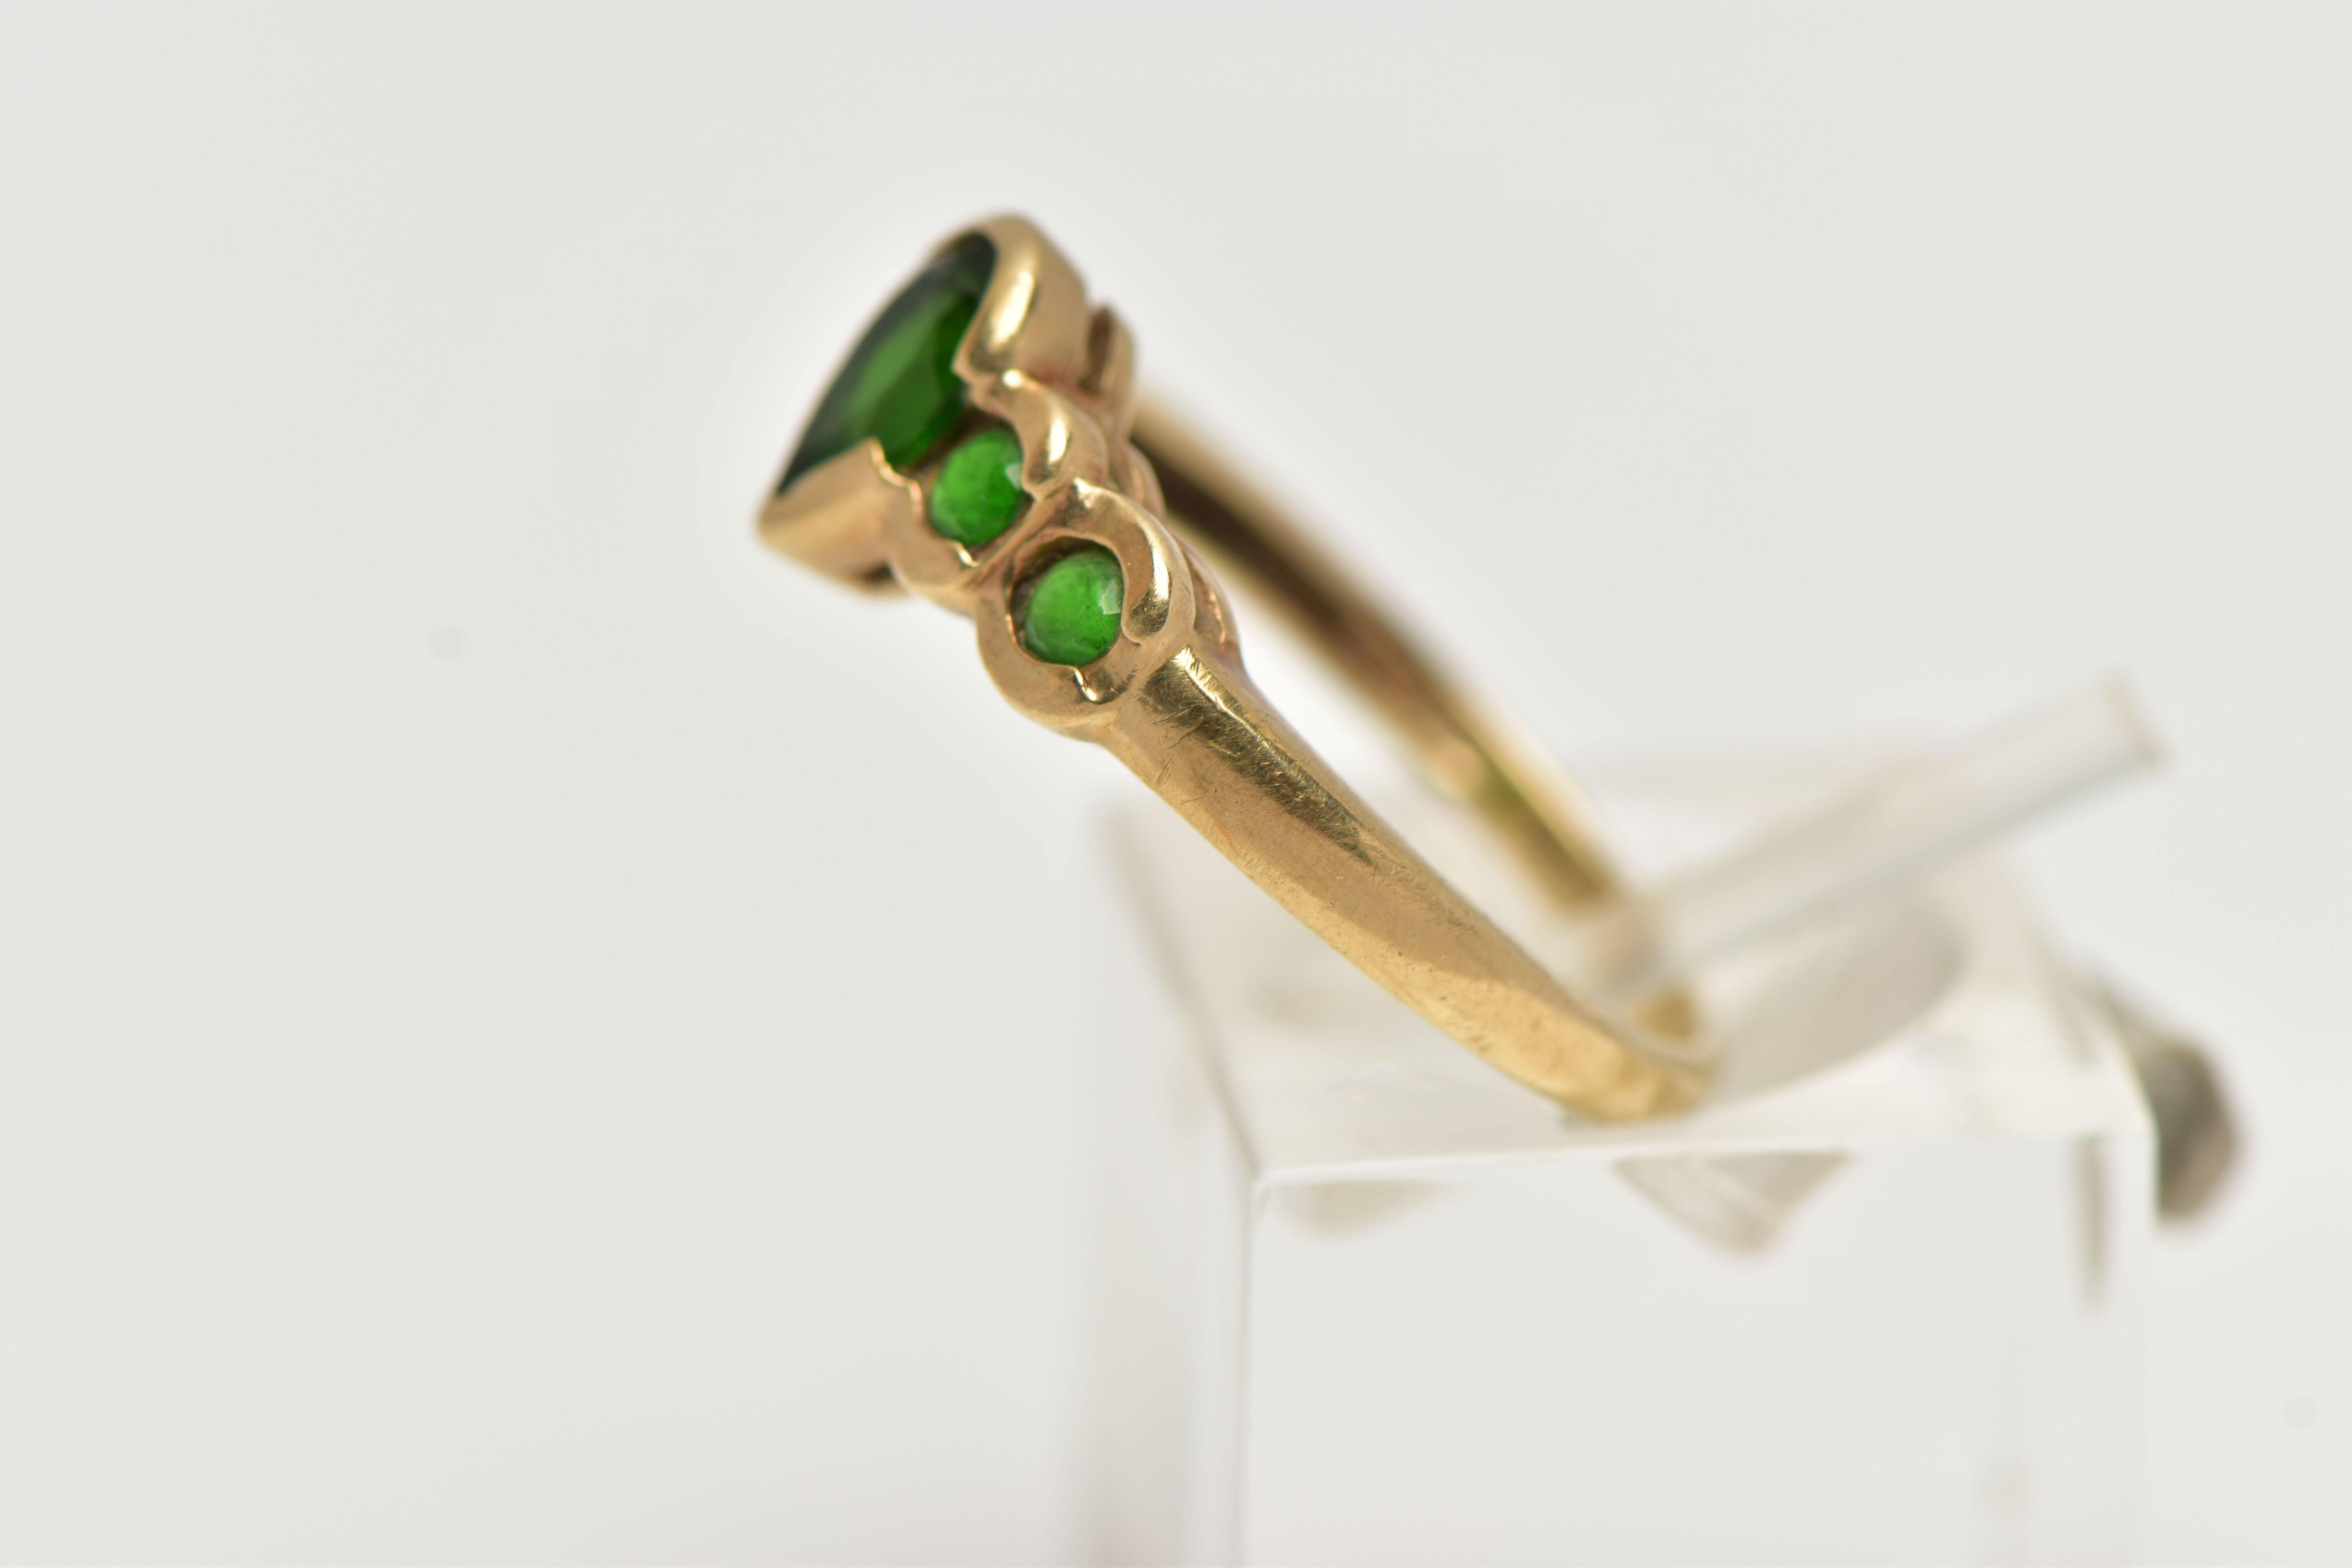 A 9CT GOLD CHROME DIOPSIDE RING, designed with a central pear cut stone flanked with four smaller - Image 2 of 4